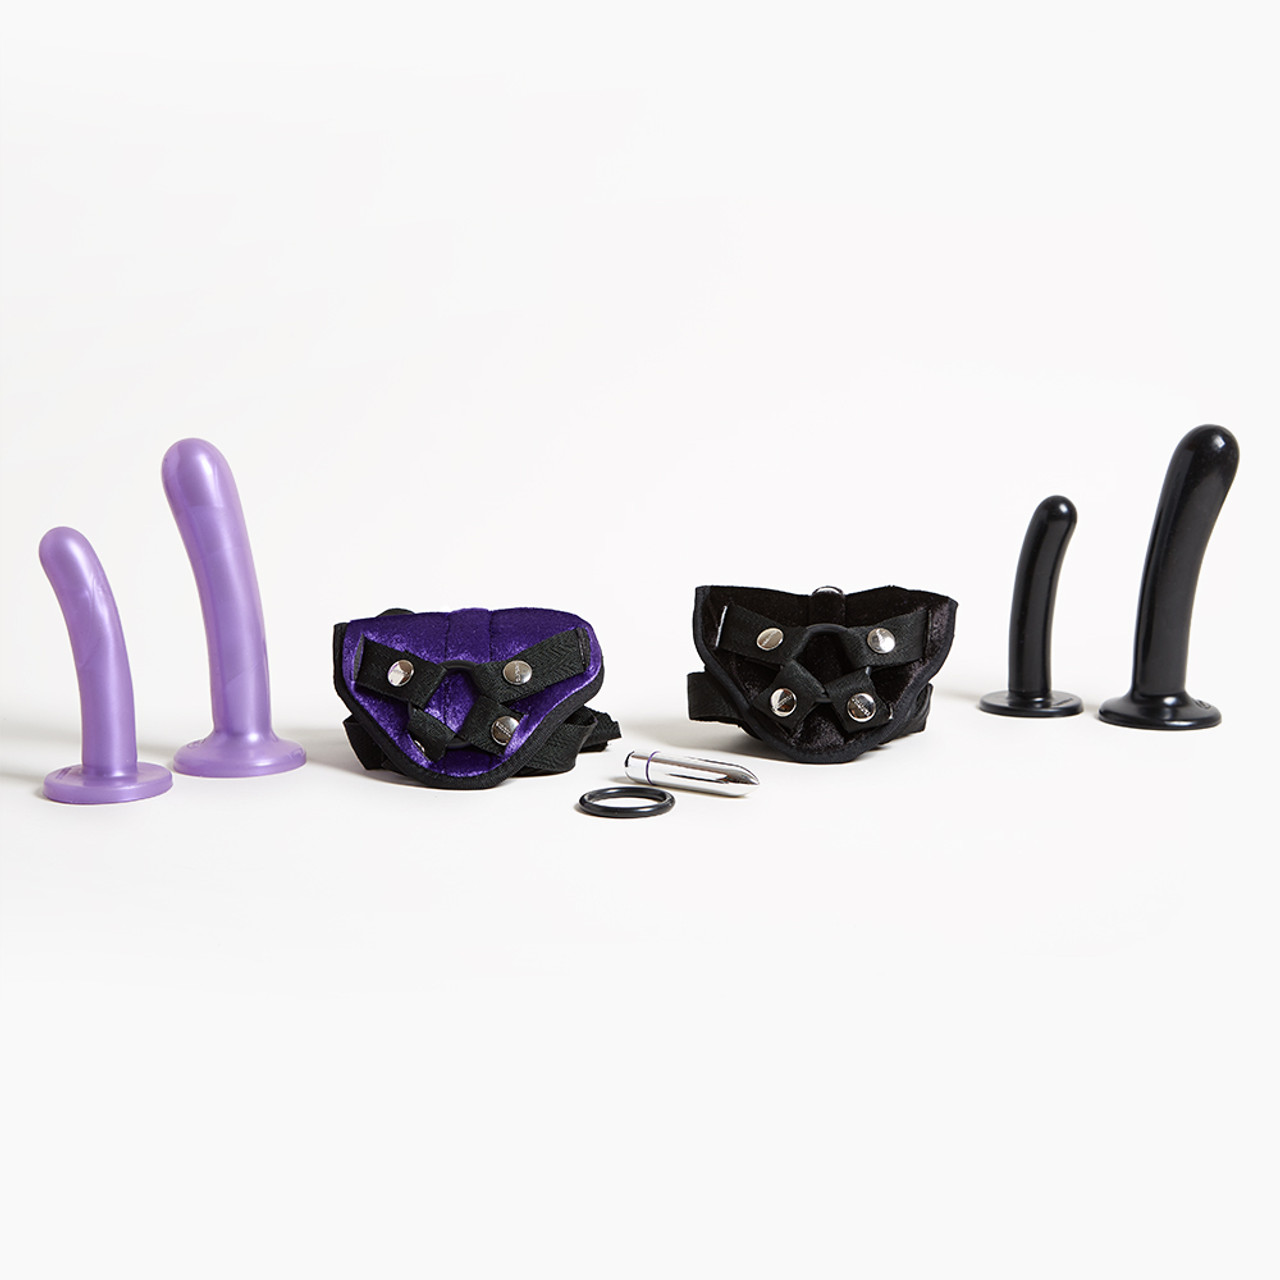 Tantus Bend Over Intermediate Kit with purple and black color options